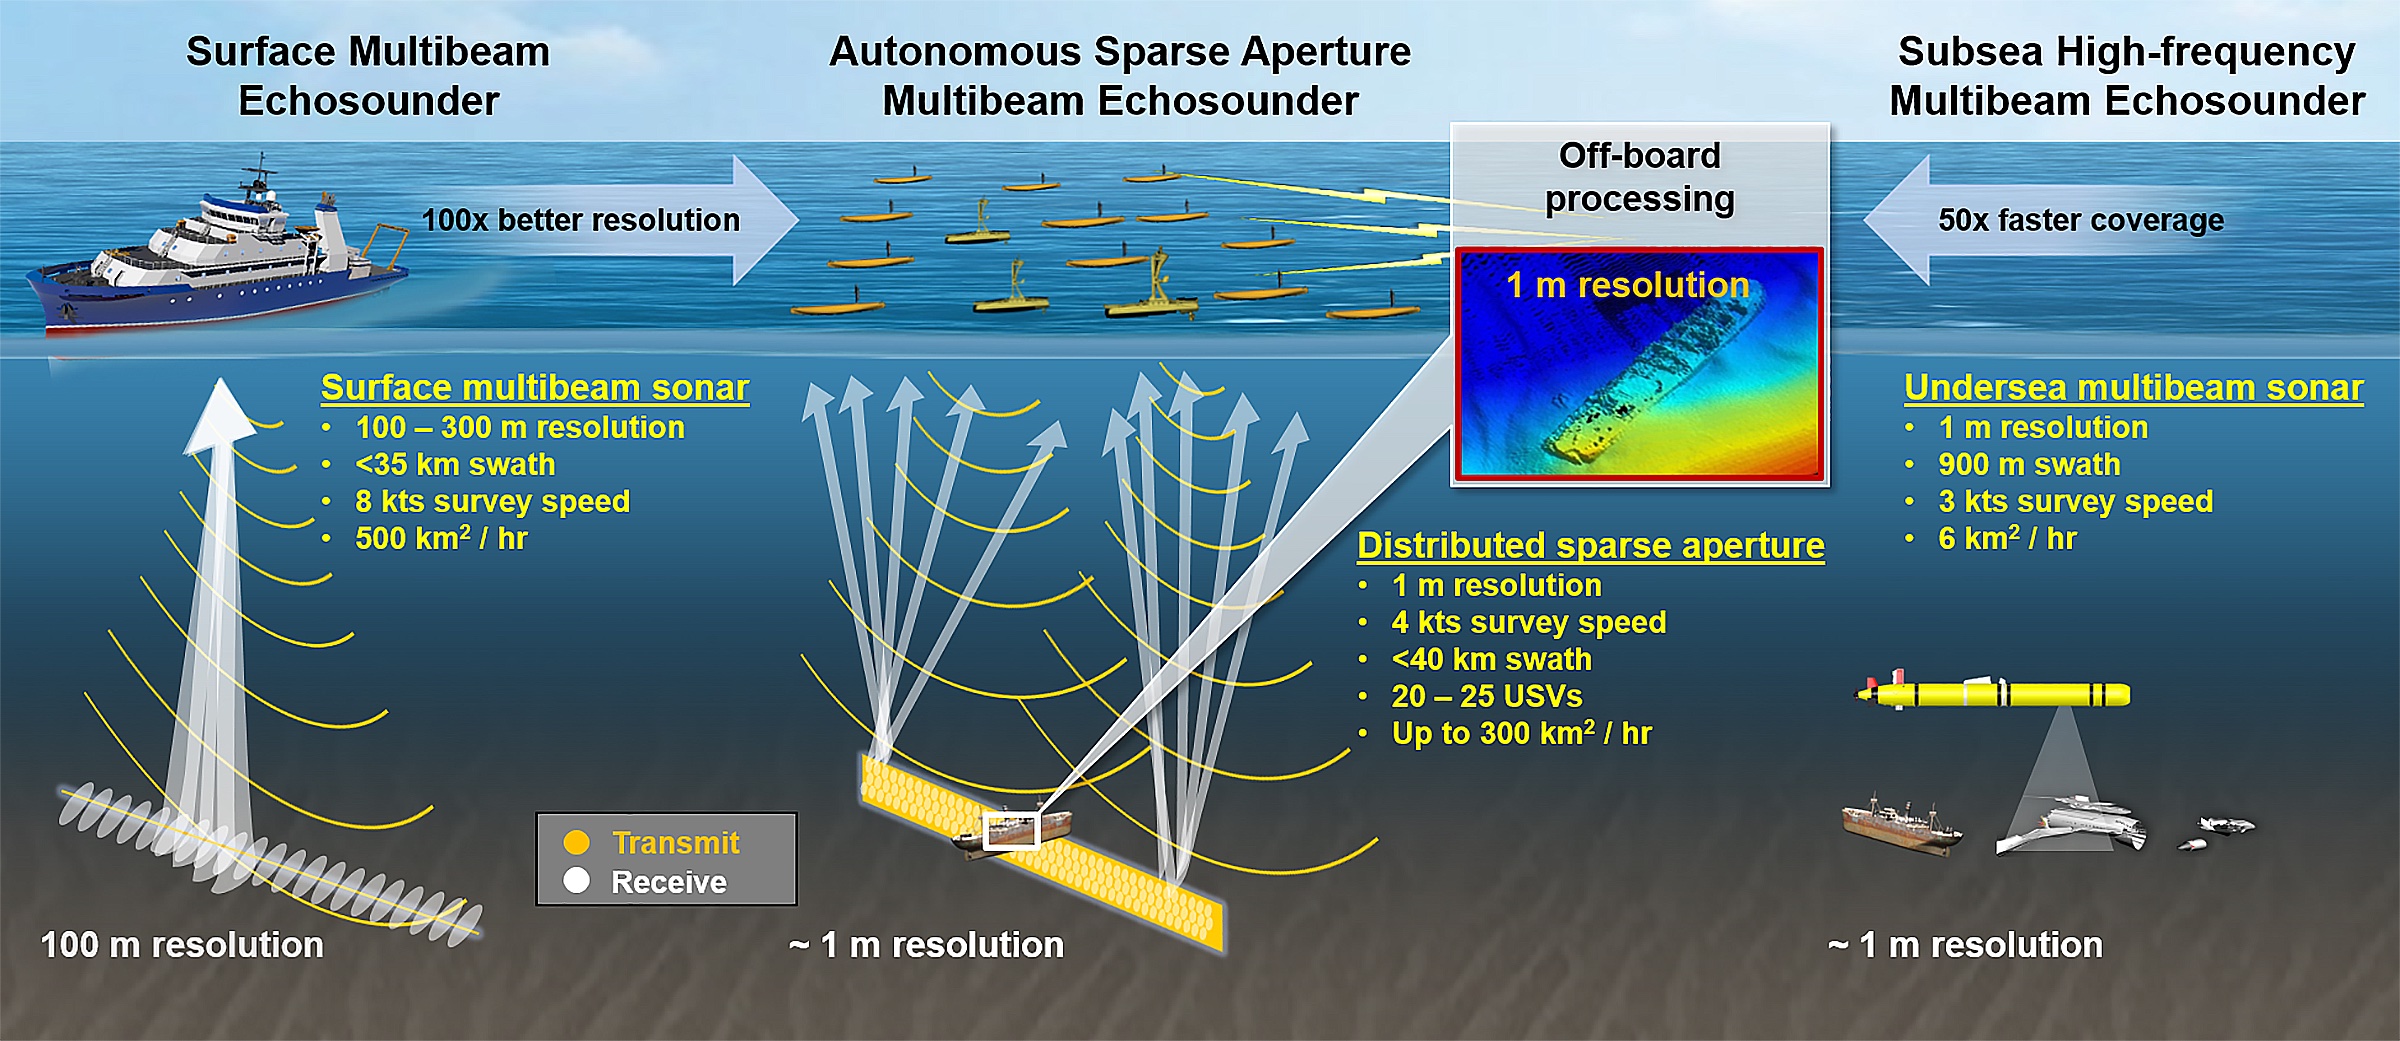 The autonomous sparse aperture concept offers a potential hundredfold improvement in resolution compared with that of existing surface ship multibeam sonar or a potential fiftyfold increase in coverage rate compared with that of subsea sonars.